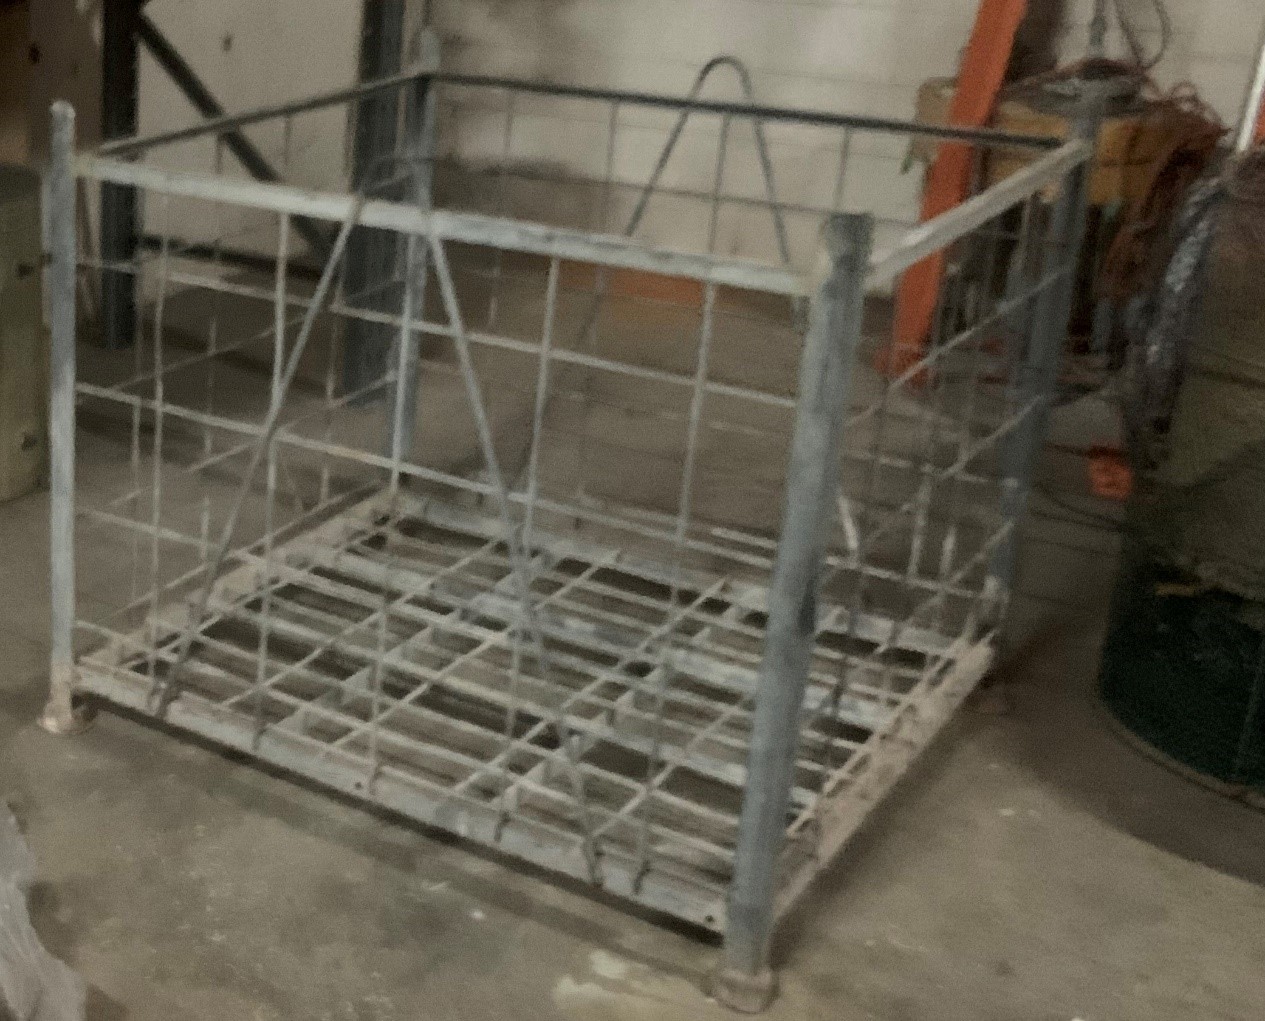 Image: The mesh storage cage used was not a suitable forklift workbox.